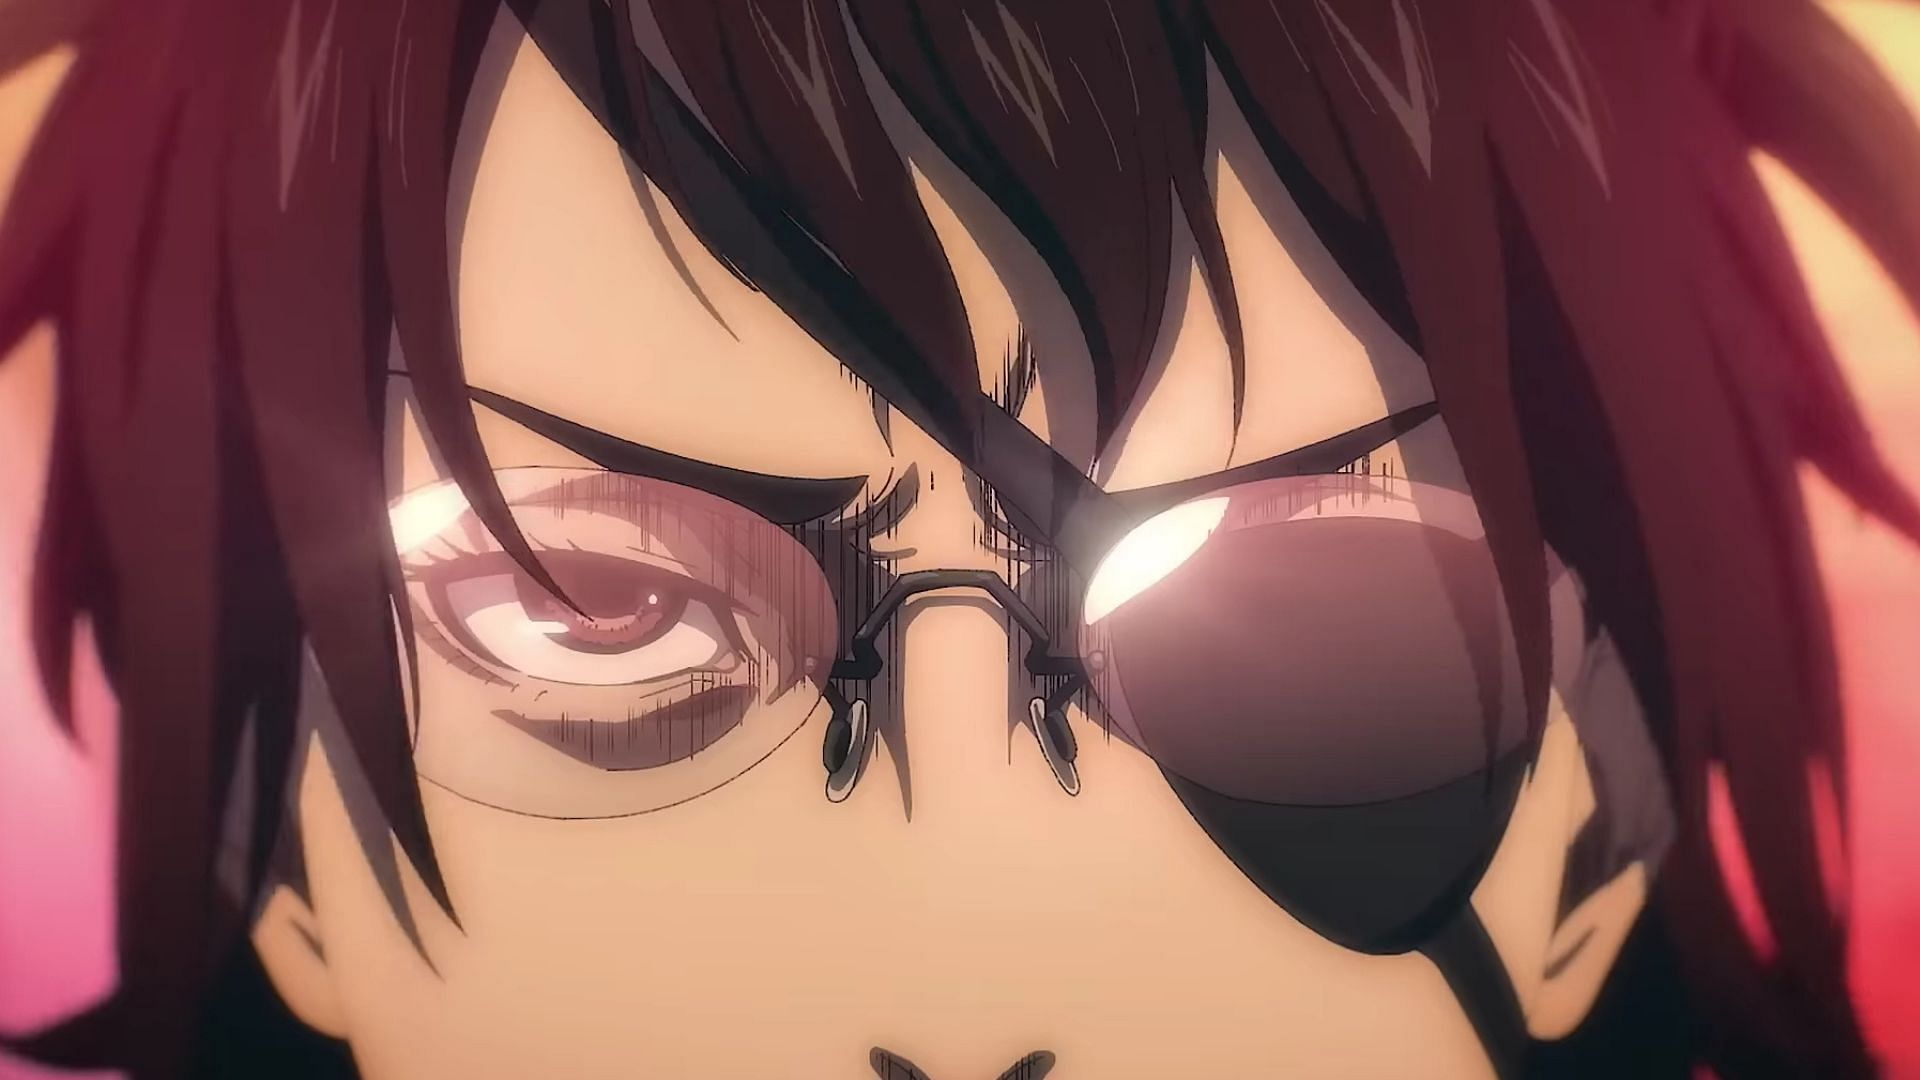 Hange with a determined expression in Attack on Titan (Image via Studio MAPPA)